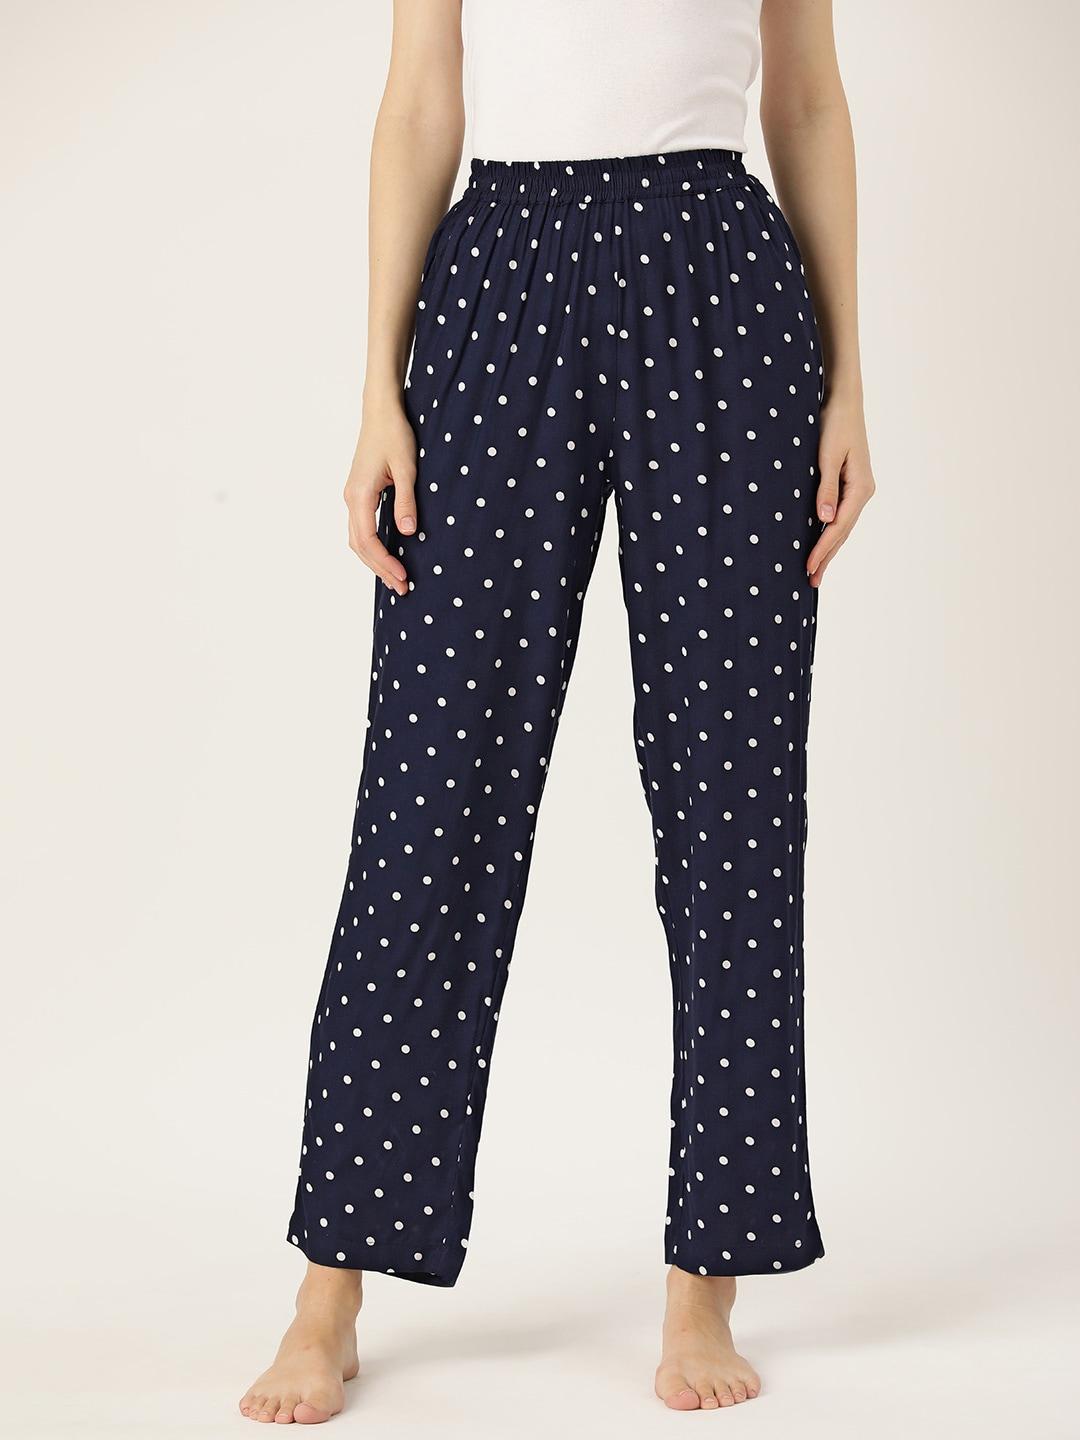 rue collection polka dots printed pure cotton lounge pants